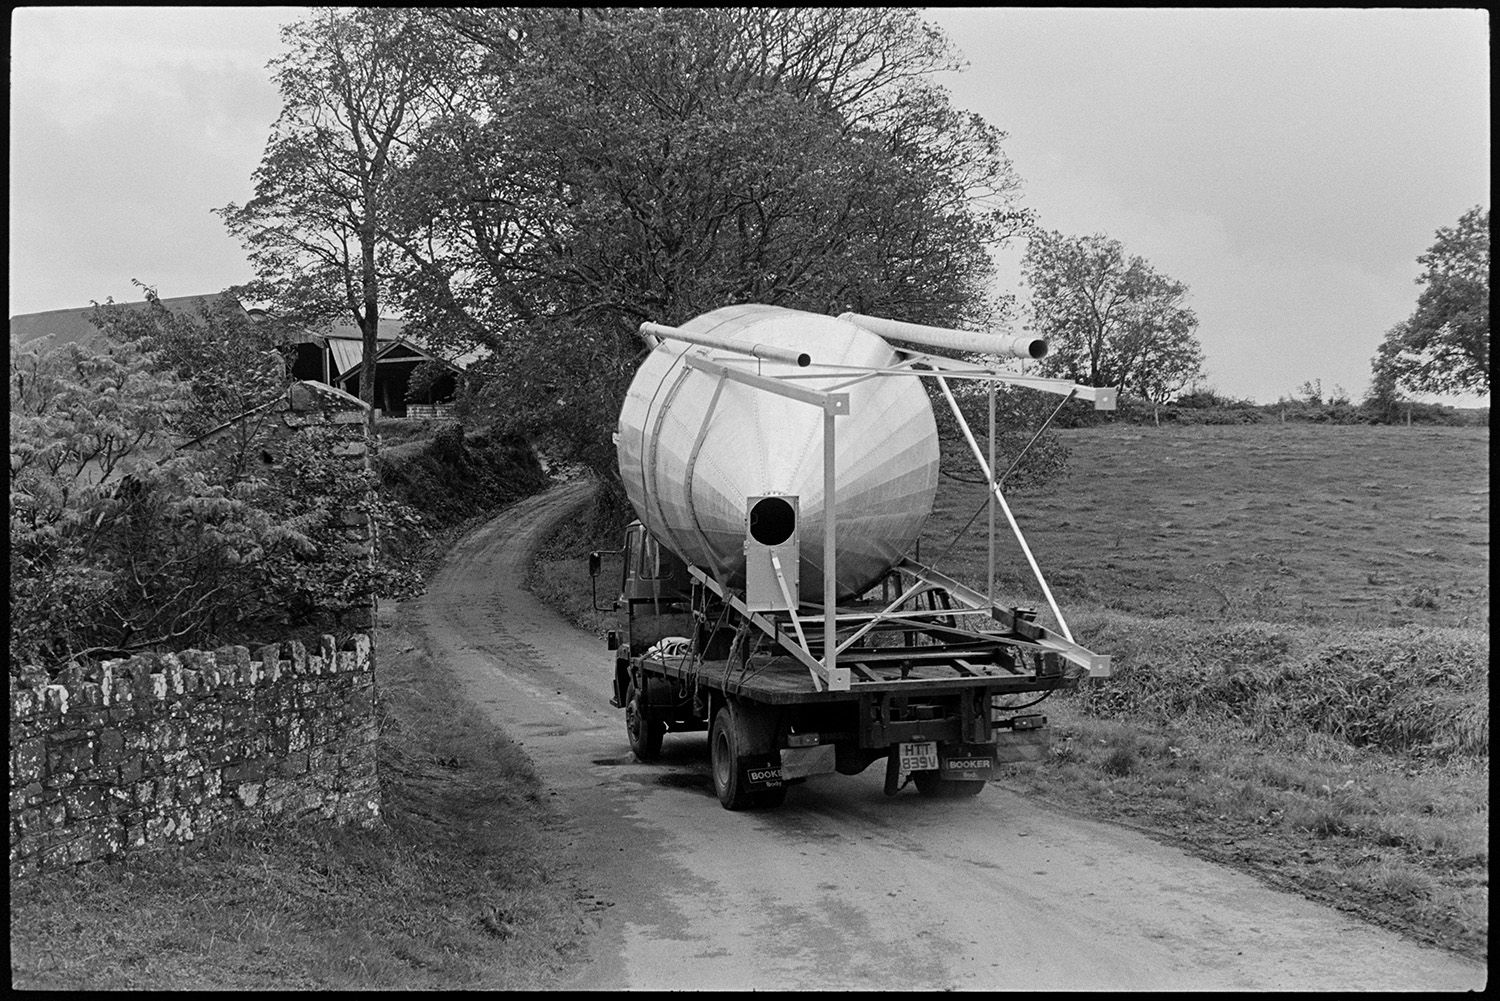 Lorry carrying large silo. 
[A lorry carrying a large silo up a lane to a farm at Harepath, Beaford. Farm buildings can be seen behind trees in the background.]